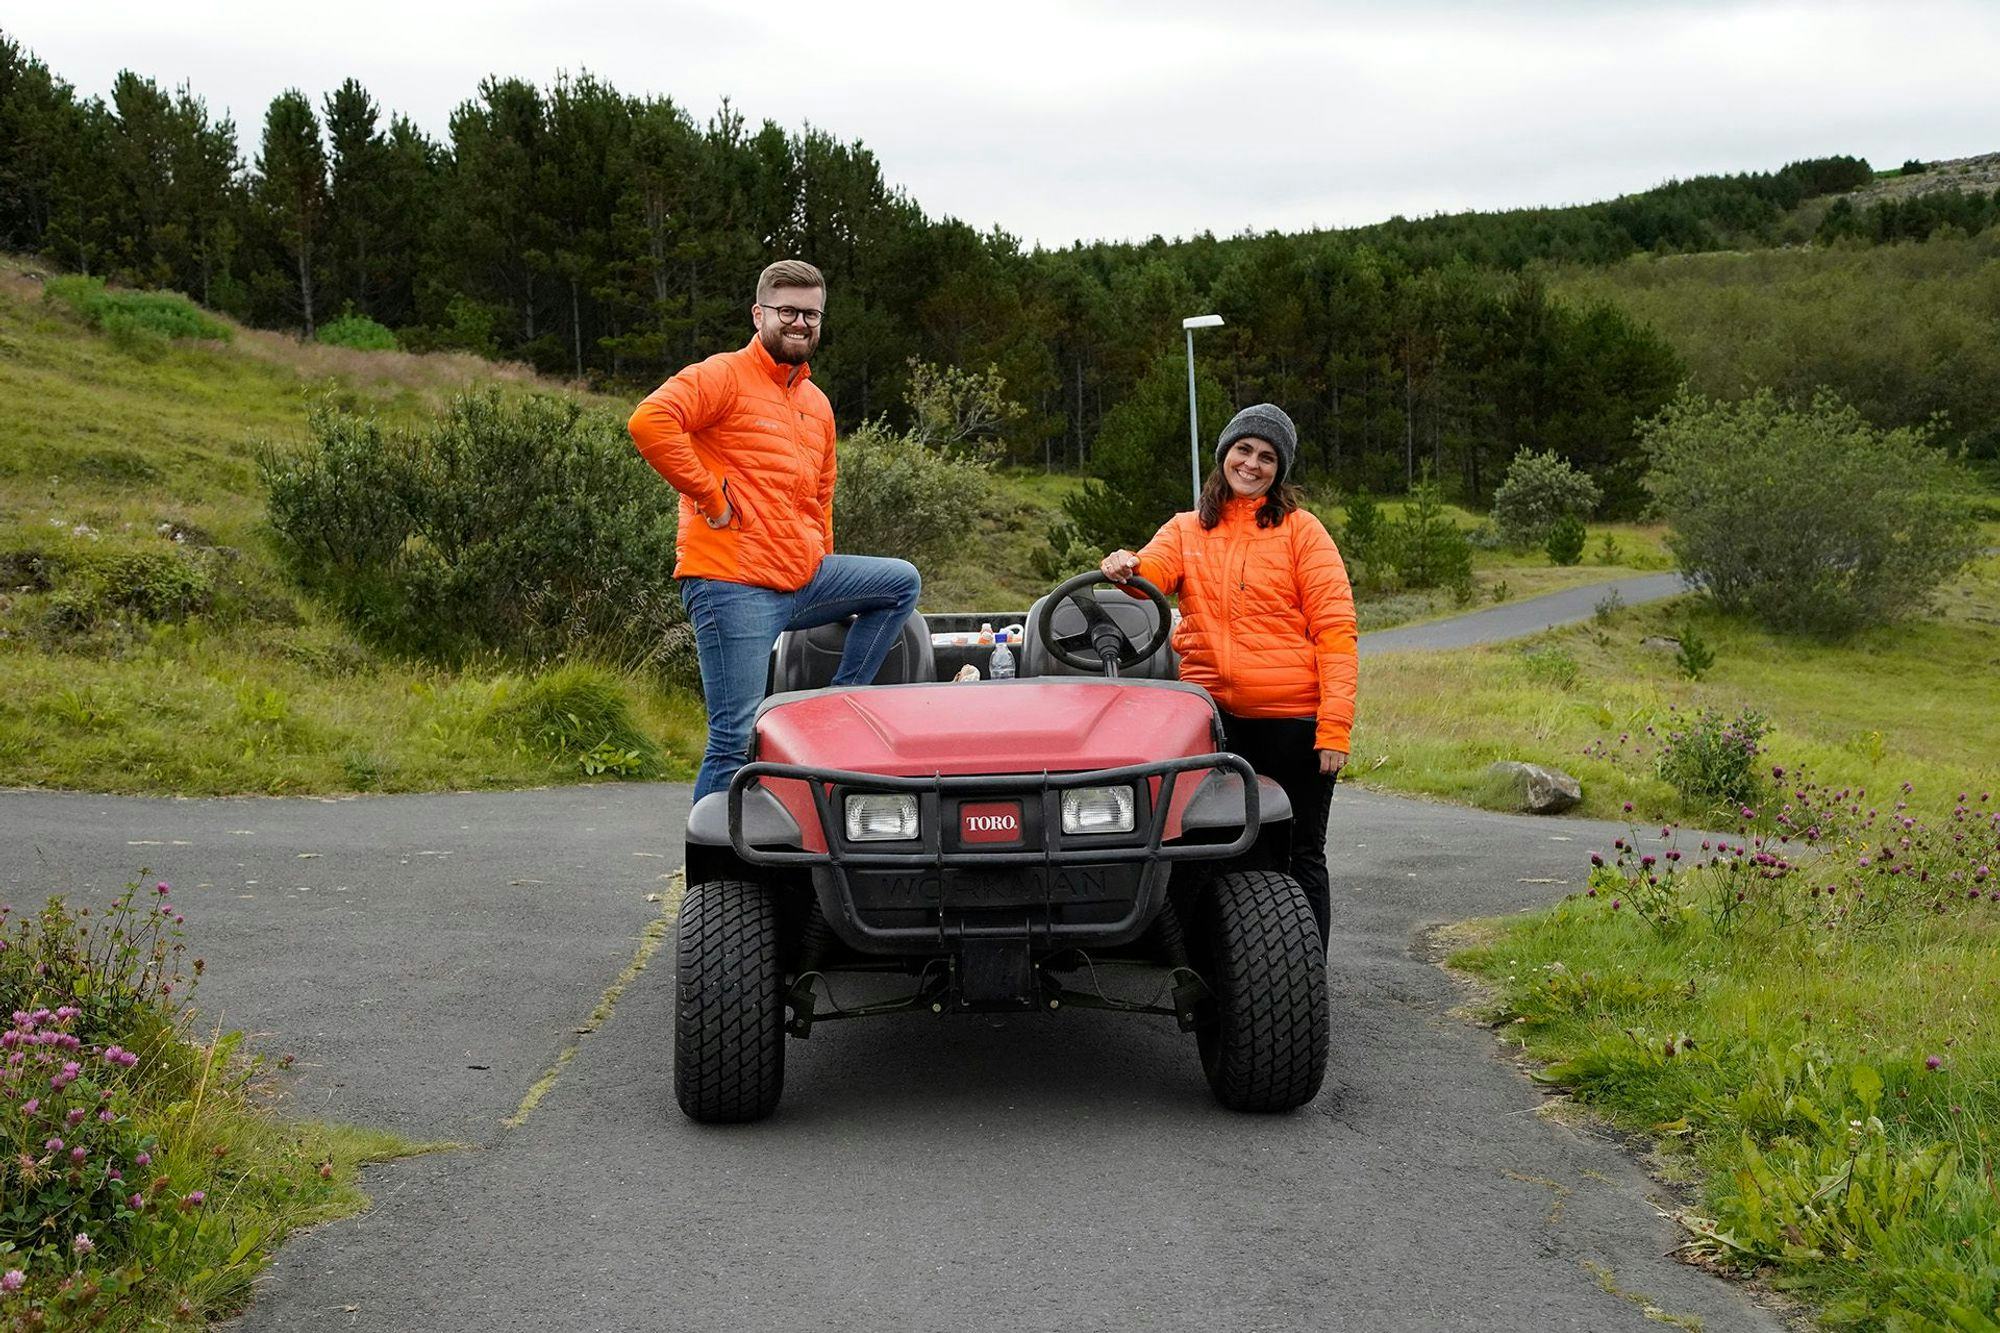 Two individuals in a bright orange jacket standing next to a red golf cart